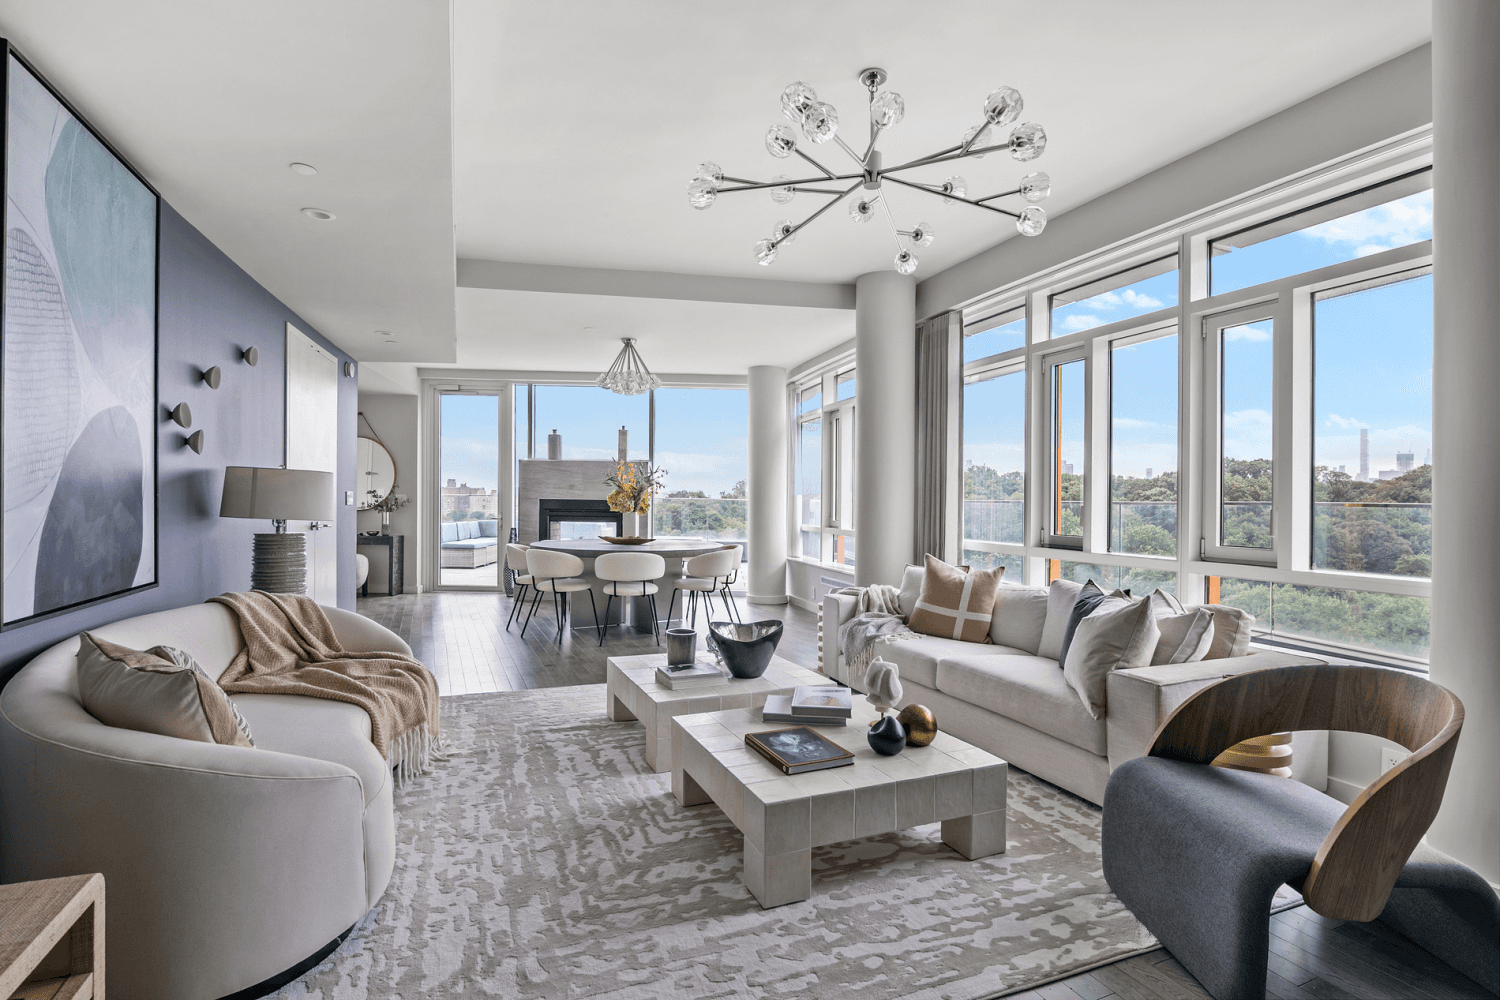 Nestled in Circa Central Park at 285 W 110th St, Penthouse 10A is a distinctive penthouse boasting five bedrooms, 4.